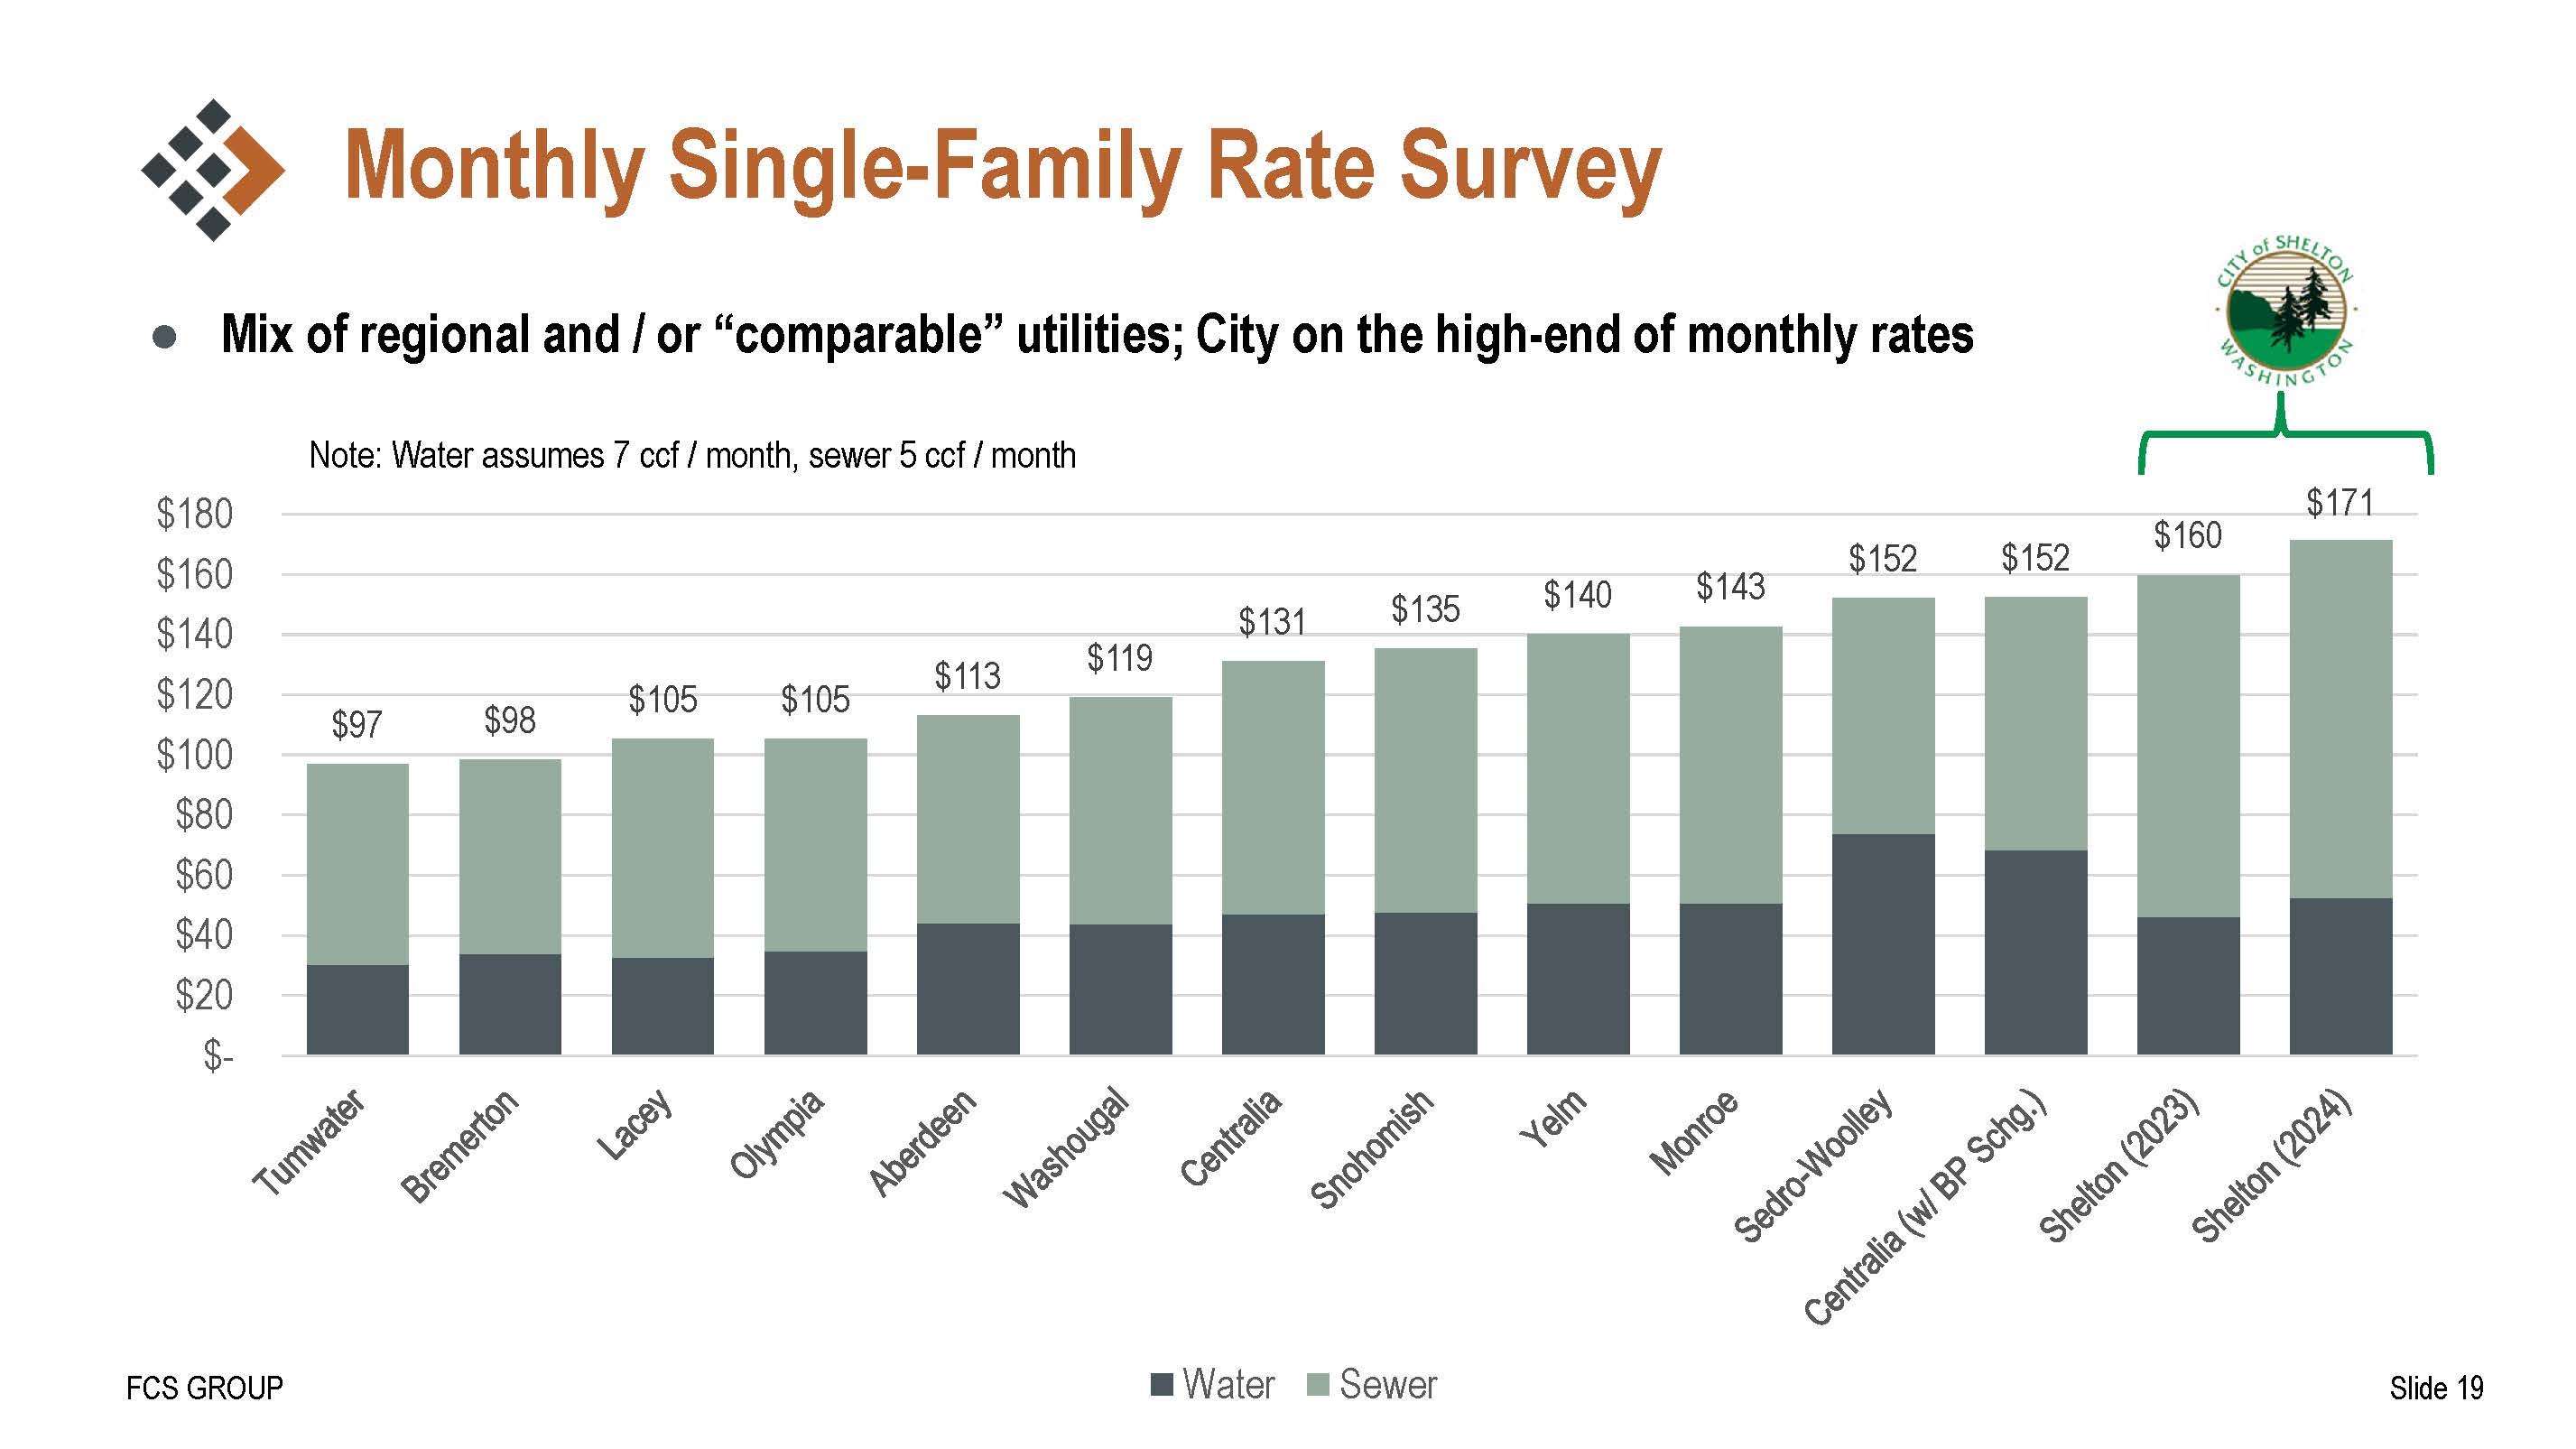 Monthly Single-Family Rate Survey